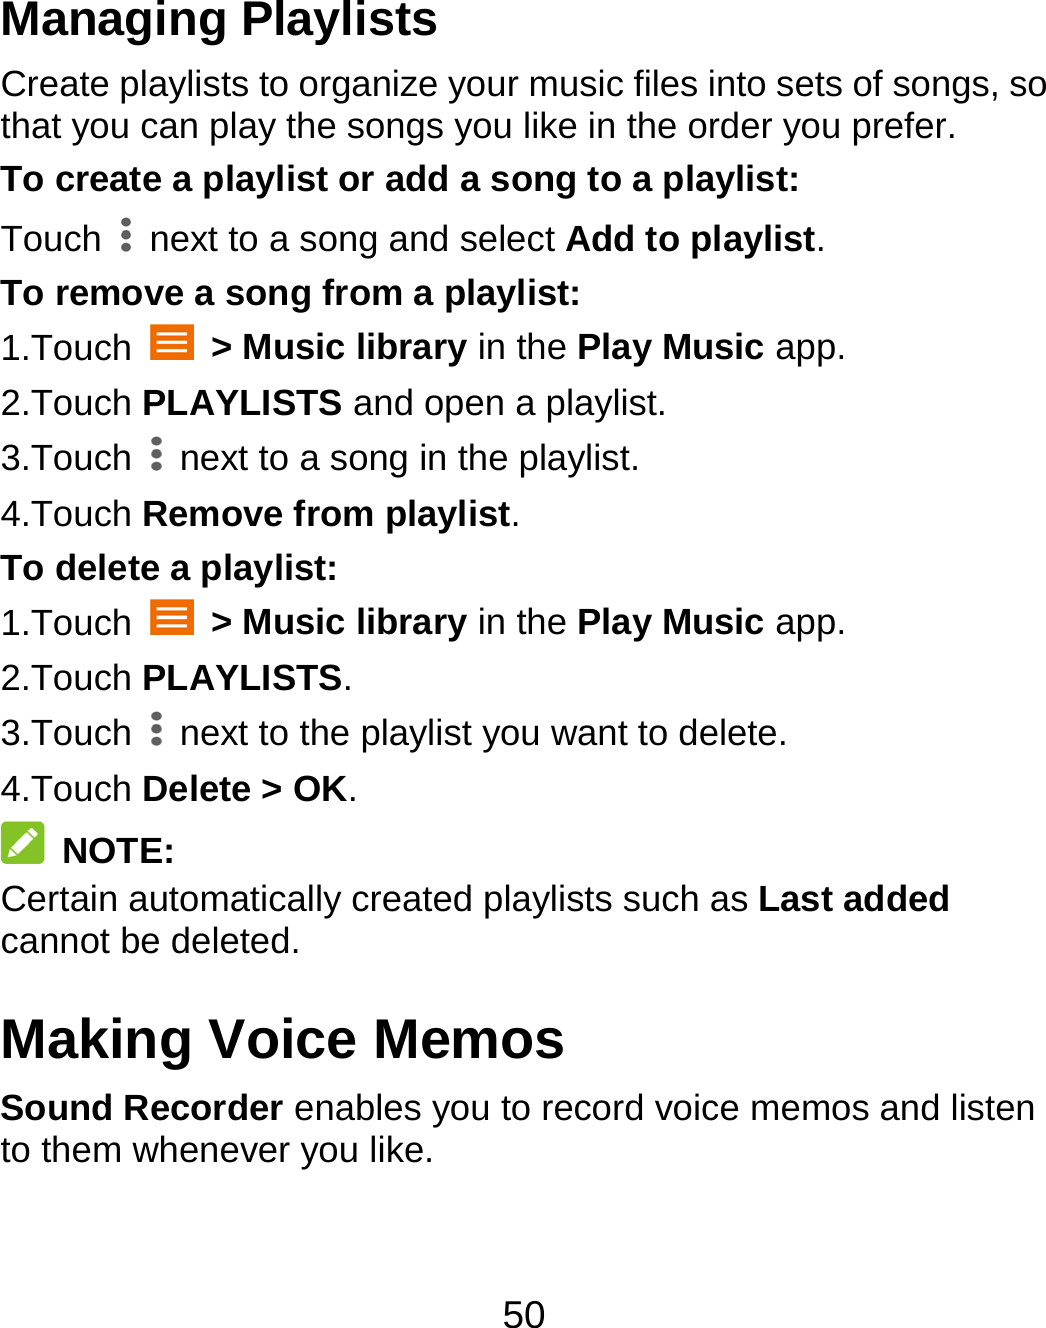 50 Managing Playlists Create playlists to organize your music files into sets of songs, so that you can play the songs you like in the order you prefer. To create a playlist or add a song to a playlist: Touch    next to a song and select Add to playlist. To remove a song from a playlist: 1.Touch   &gt; Music library in the Play Music app. 2.Touch PLAYLISTS and open a playlist. 3.Touch    next to a song in the playlist. 4.Touch Remove from playlist. To delete a playlist: 1.Touch   &gt; Music library in the Play Music app. 2.Touch PLAYLISTS. 3.Touch    next to the playlist you want to delete. 4.Touch Delete &gt; OK.  NOTE: Certain automatically created playlists such as Last added cannot be deleted. Making Voice Memos Sound Recorder enables you to record voice memos and listen to them whenever you like. 